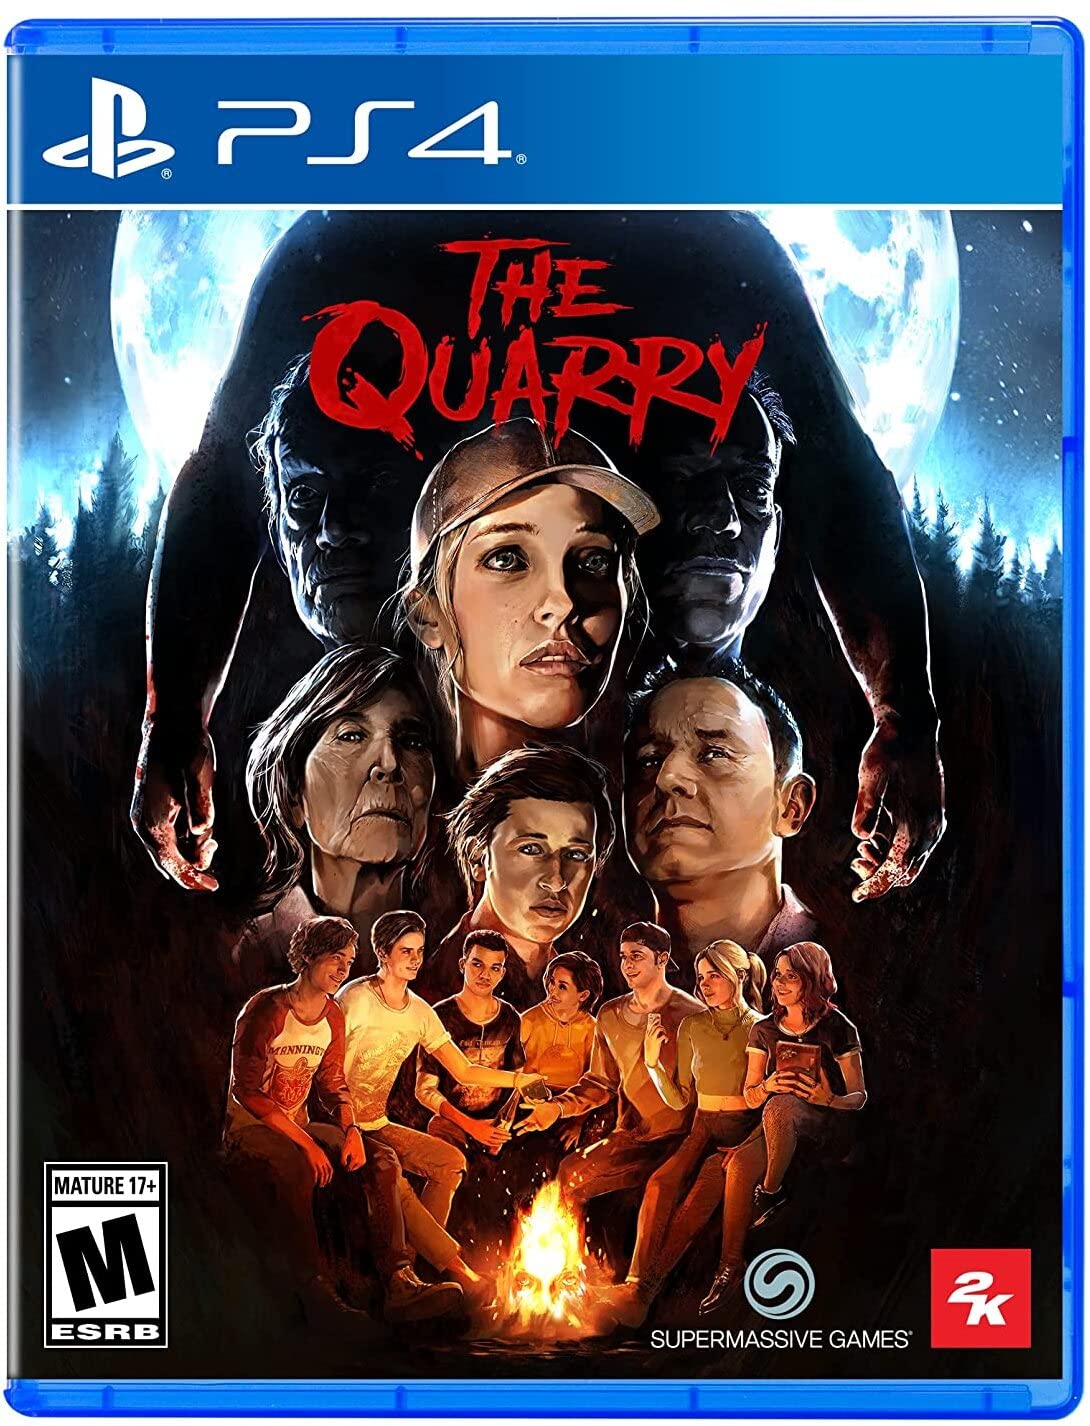 The Quarry - PlayStation 4, Xbox One $17